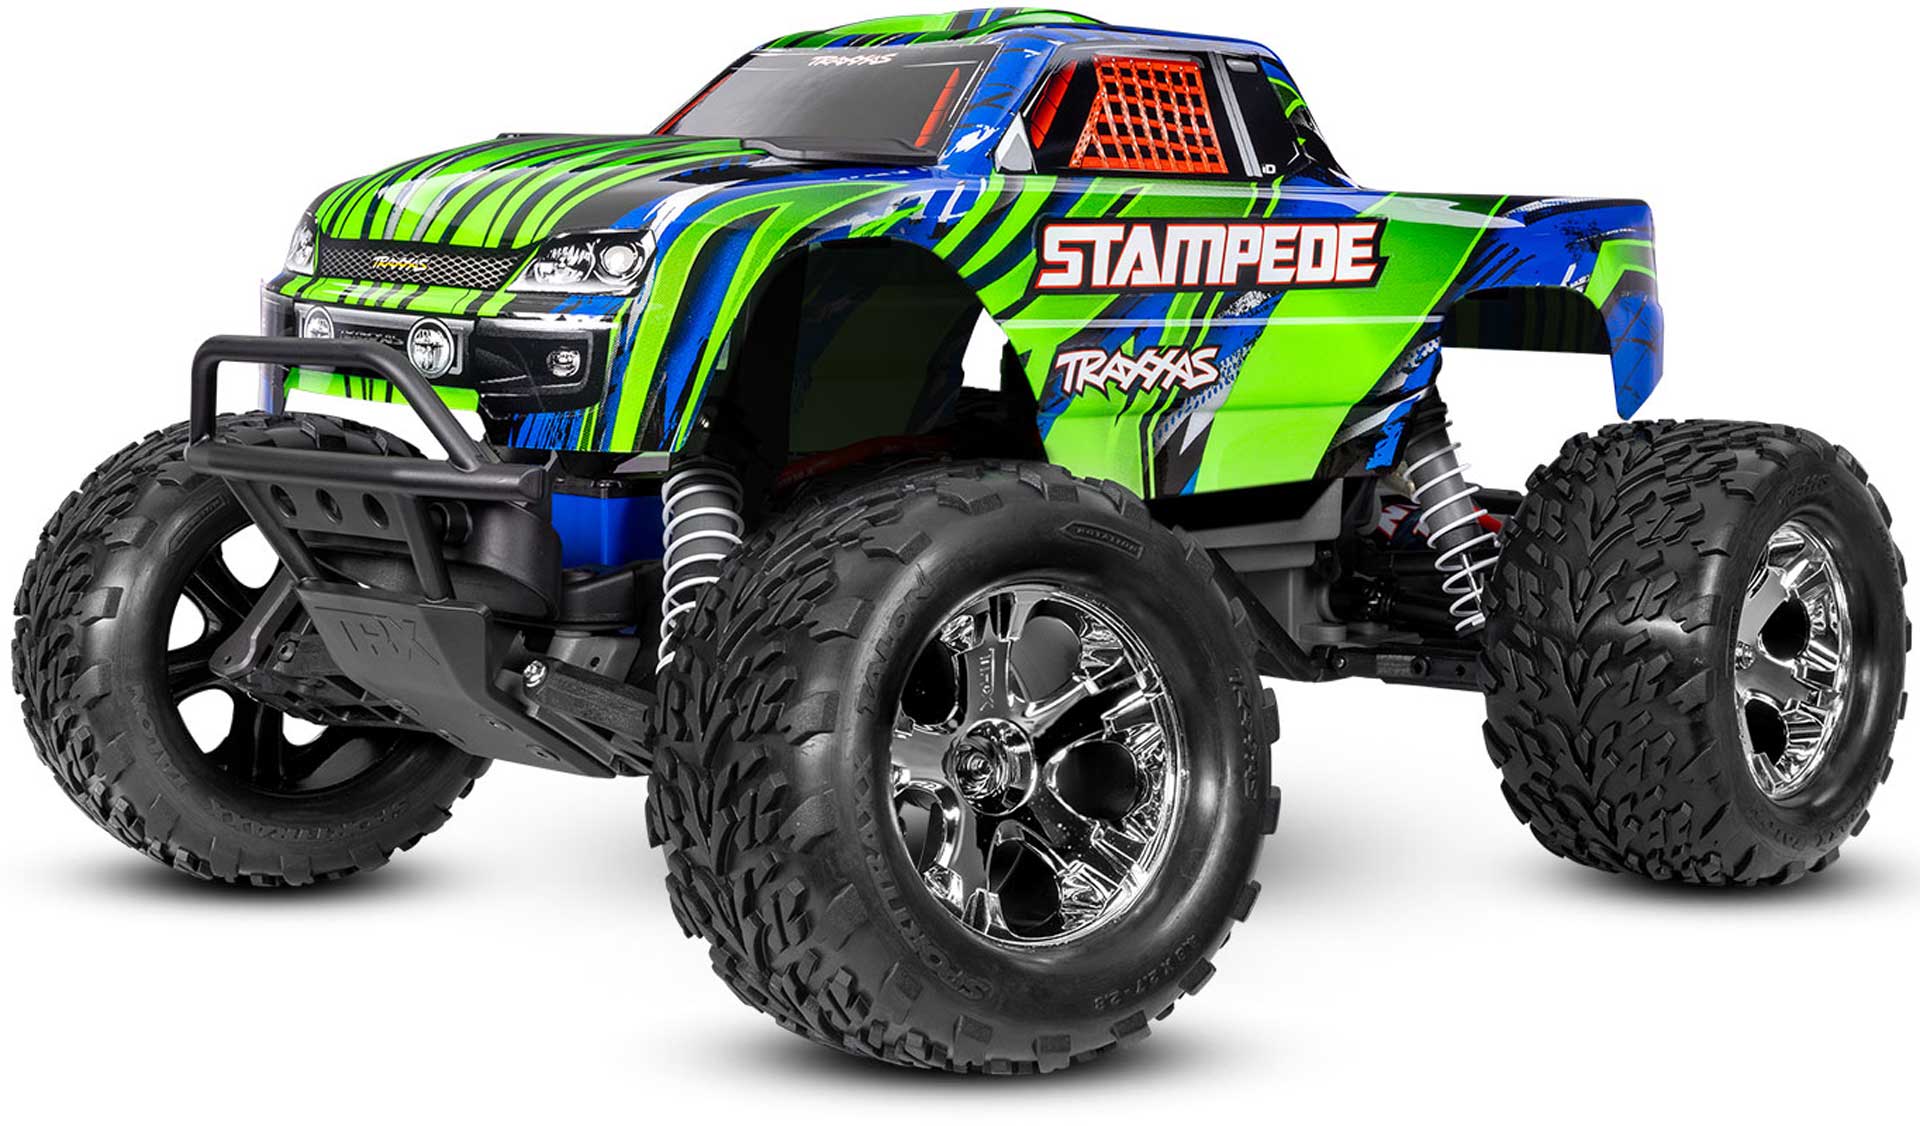 TRAXXAS STAMPEDE GREEN 1/10 2WD MONSTER-TRUCK RTR BRUSHED, HD, WITH BATTERY AND 4AMPER